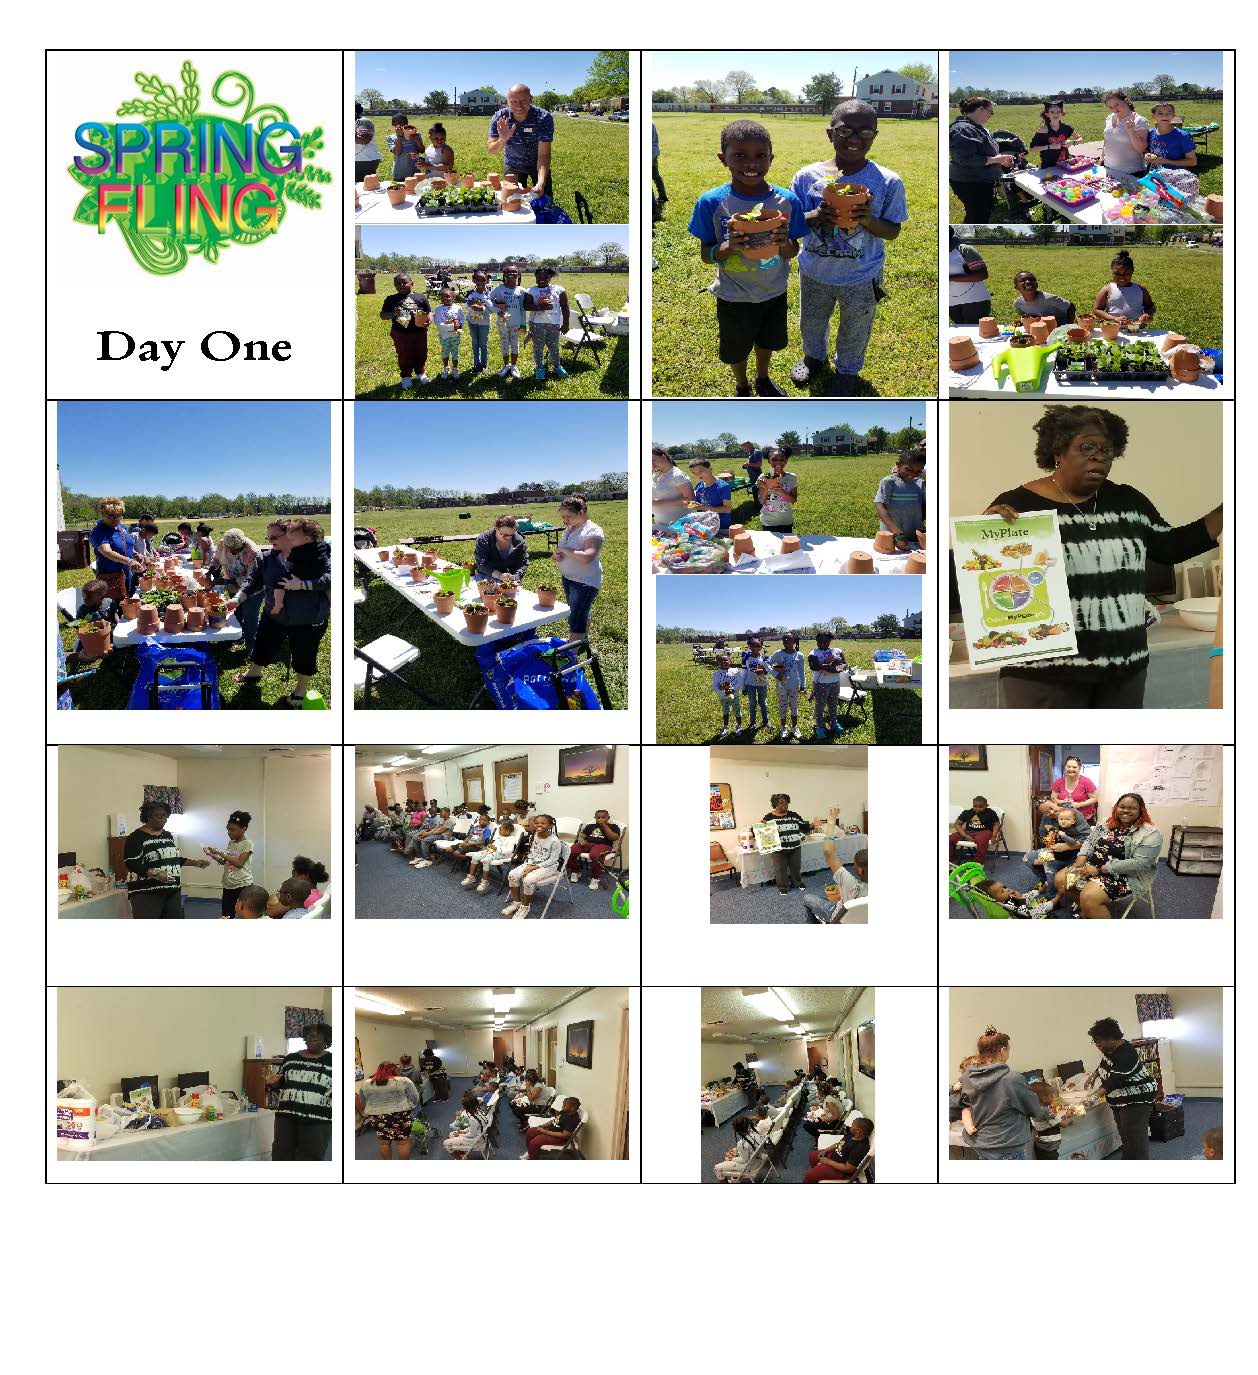 Spring fling pics collage_Page_1